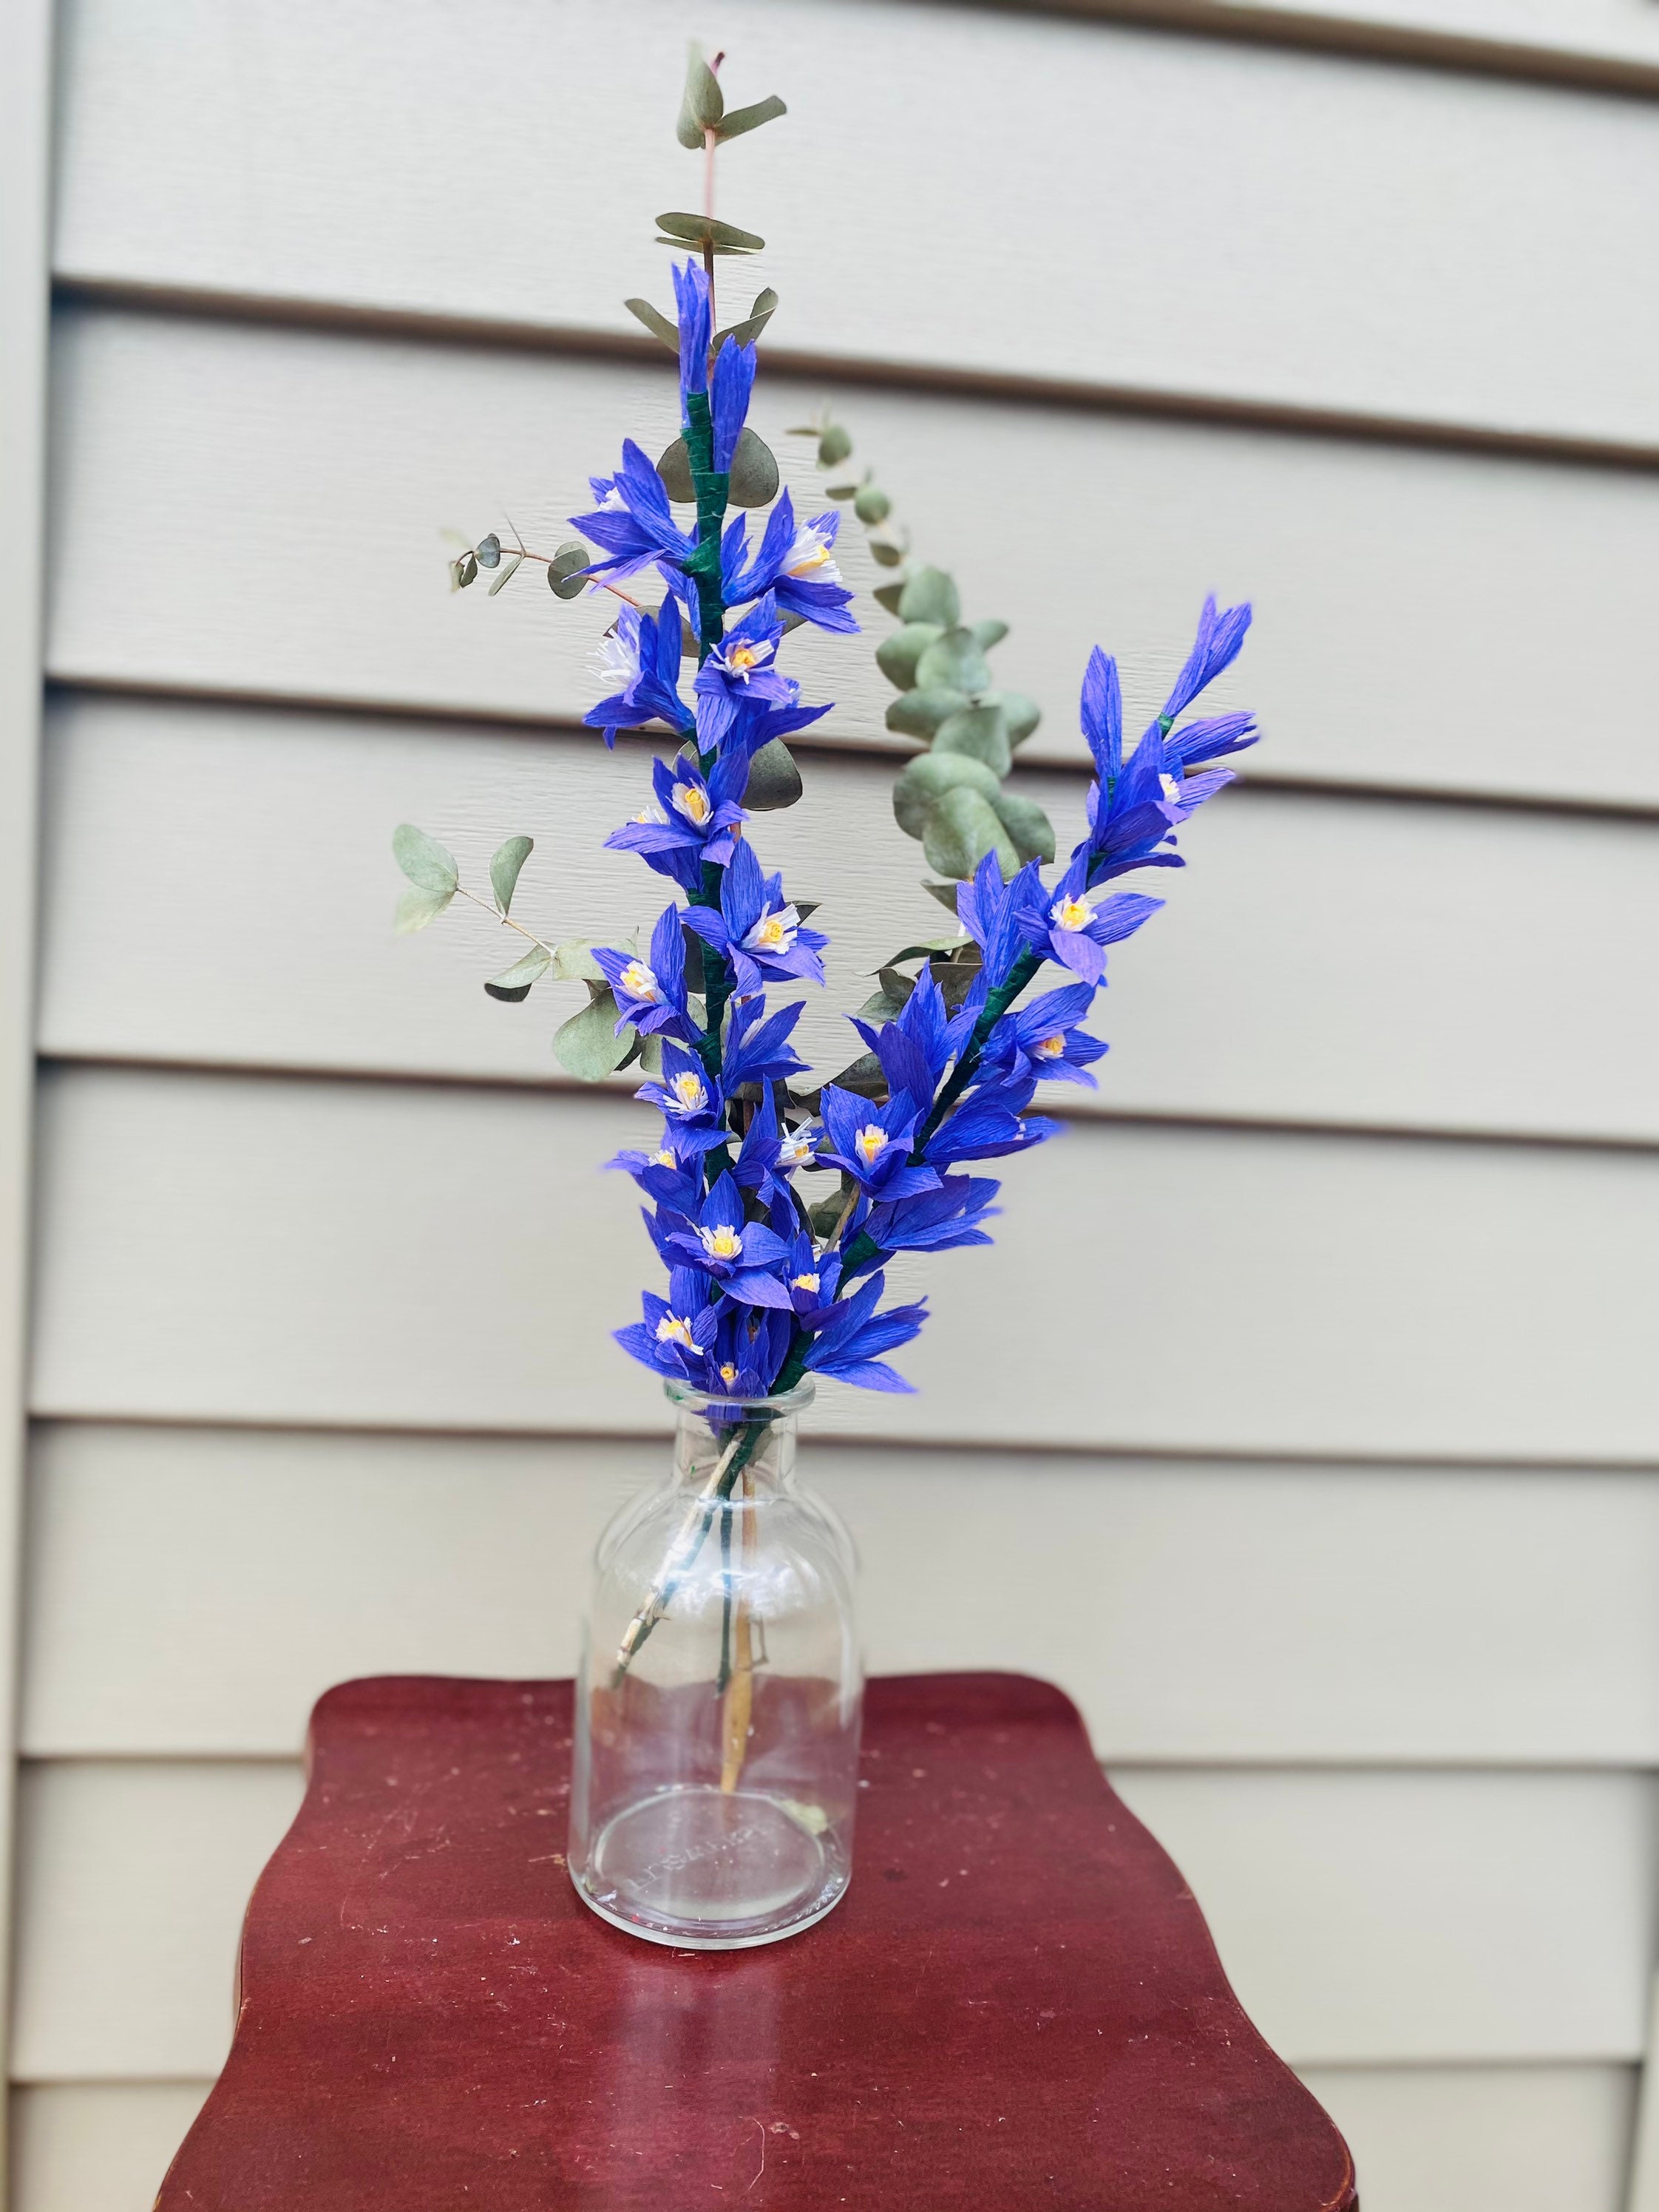 Image of A cluster of Delphinium flowers in a vase